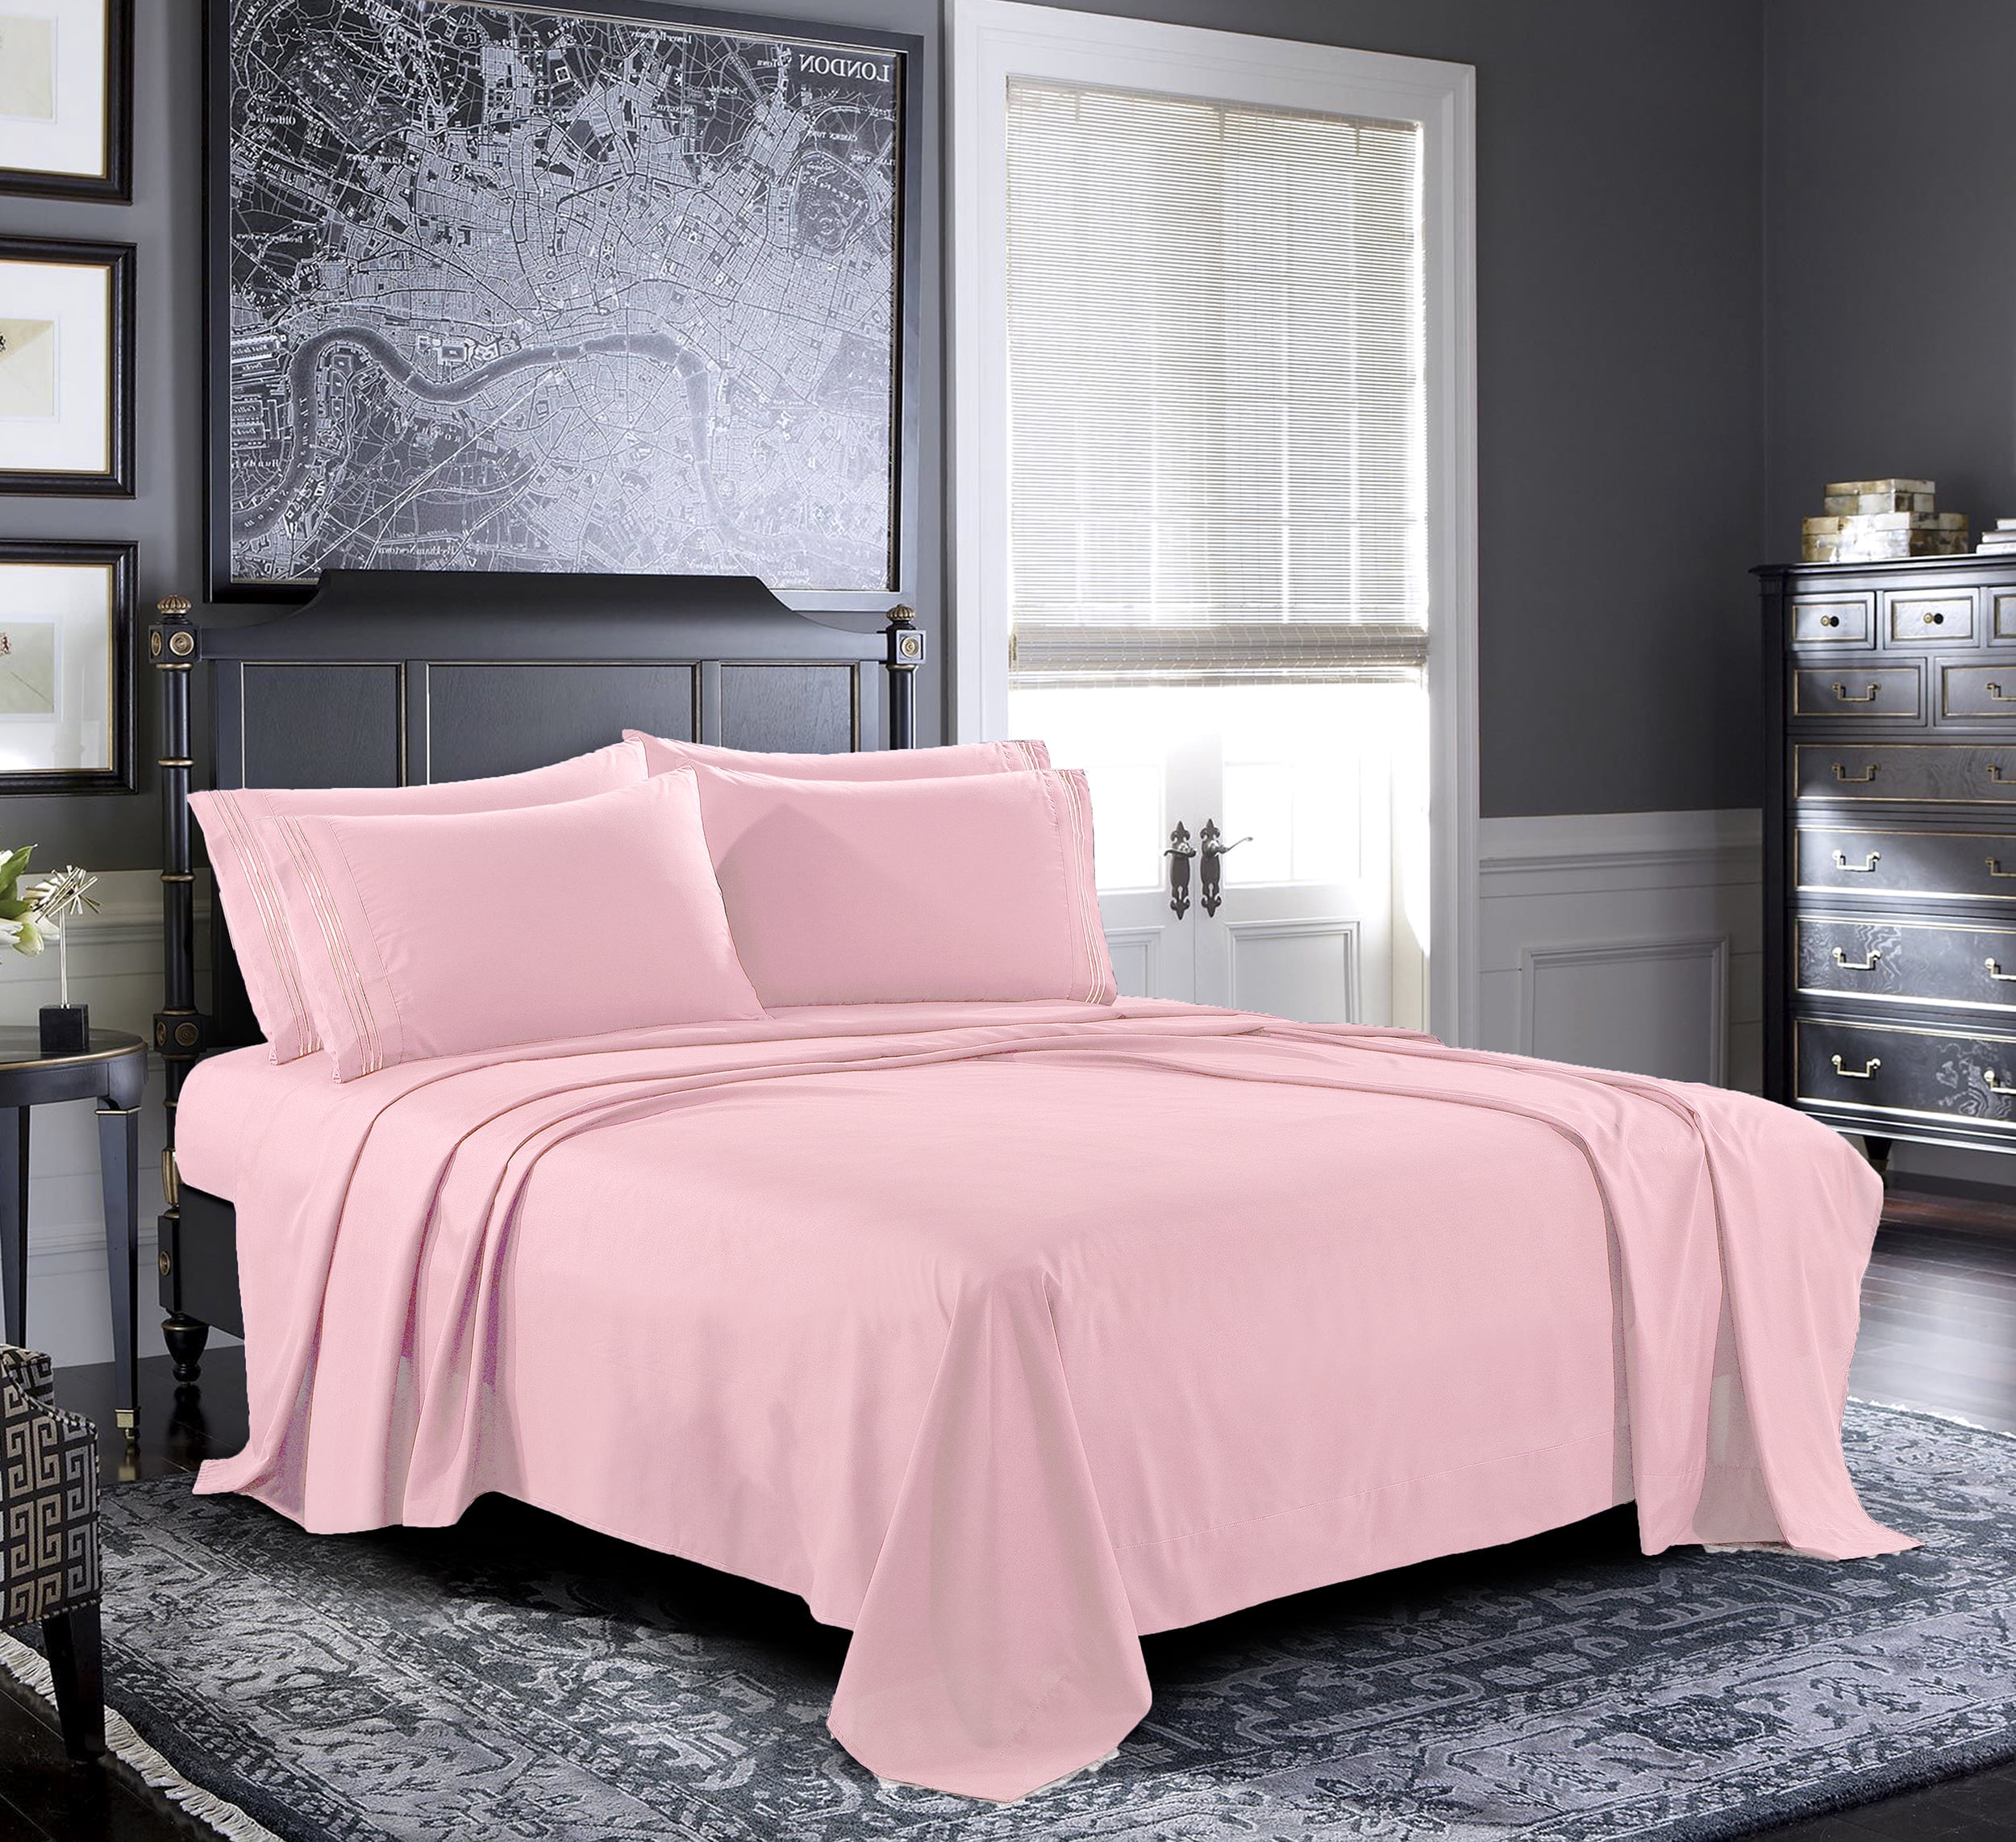 Bedding Fitted Sheet - Brushed Microfiber Fitted Sheet,Breathable